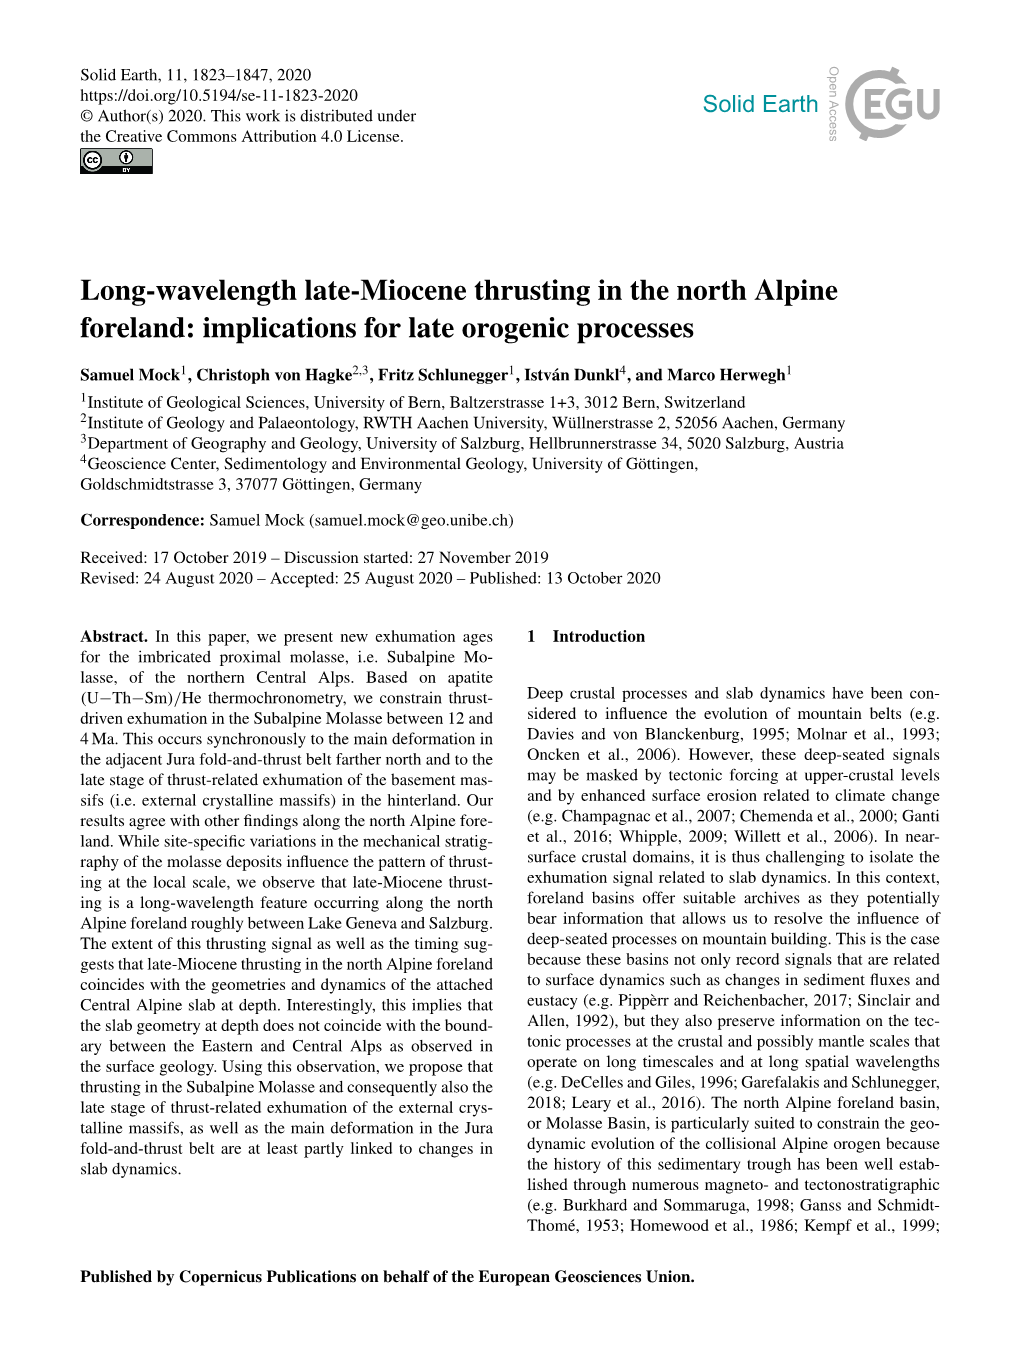 Long-Wavelength Late-Miocene Thrusting in the North Alpine Foreland: Implications for Late Orogenic Processes